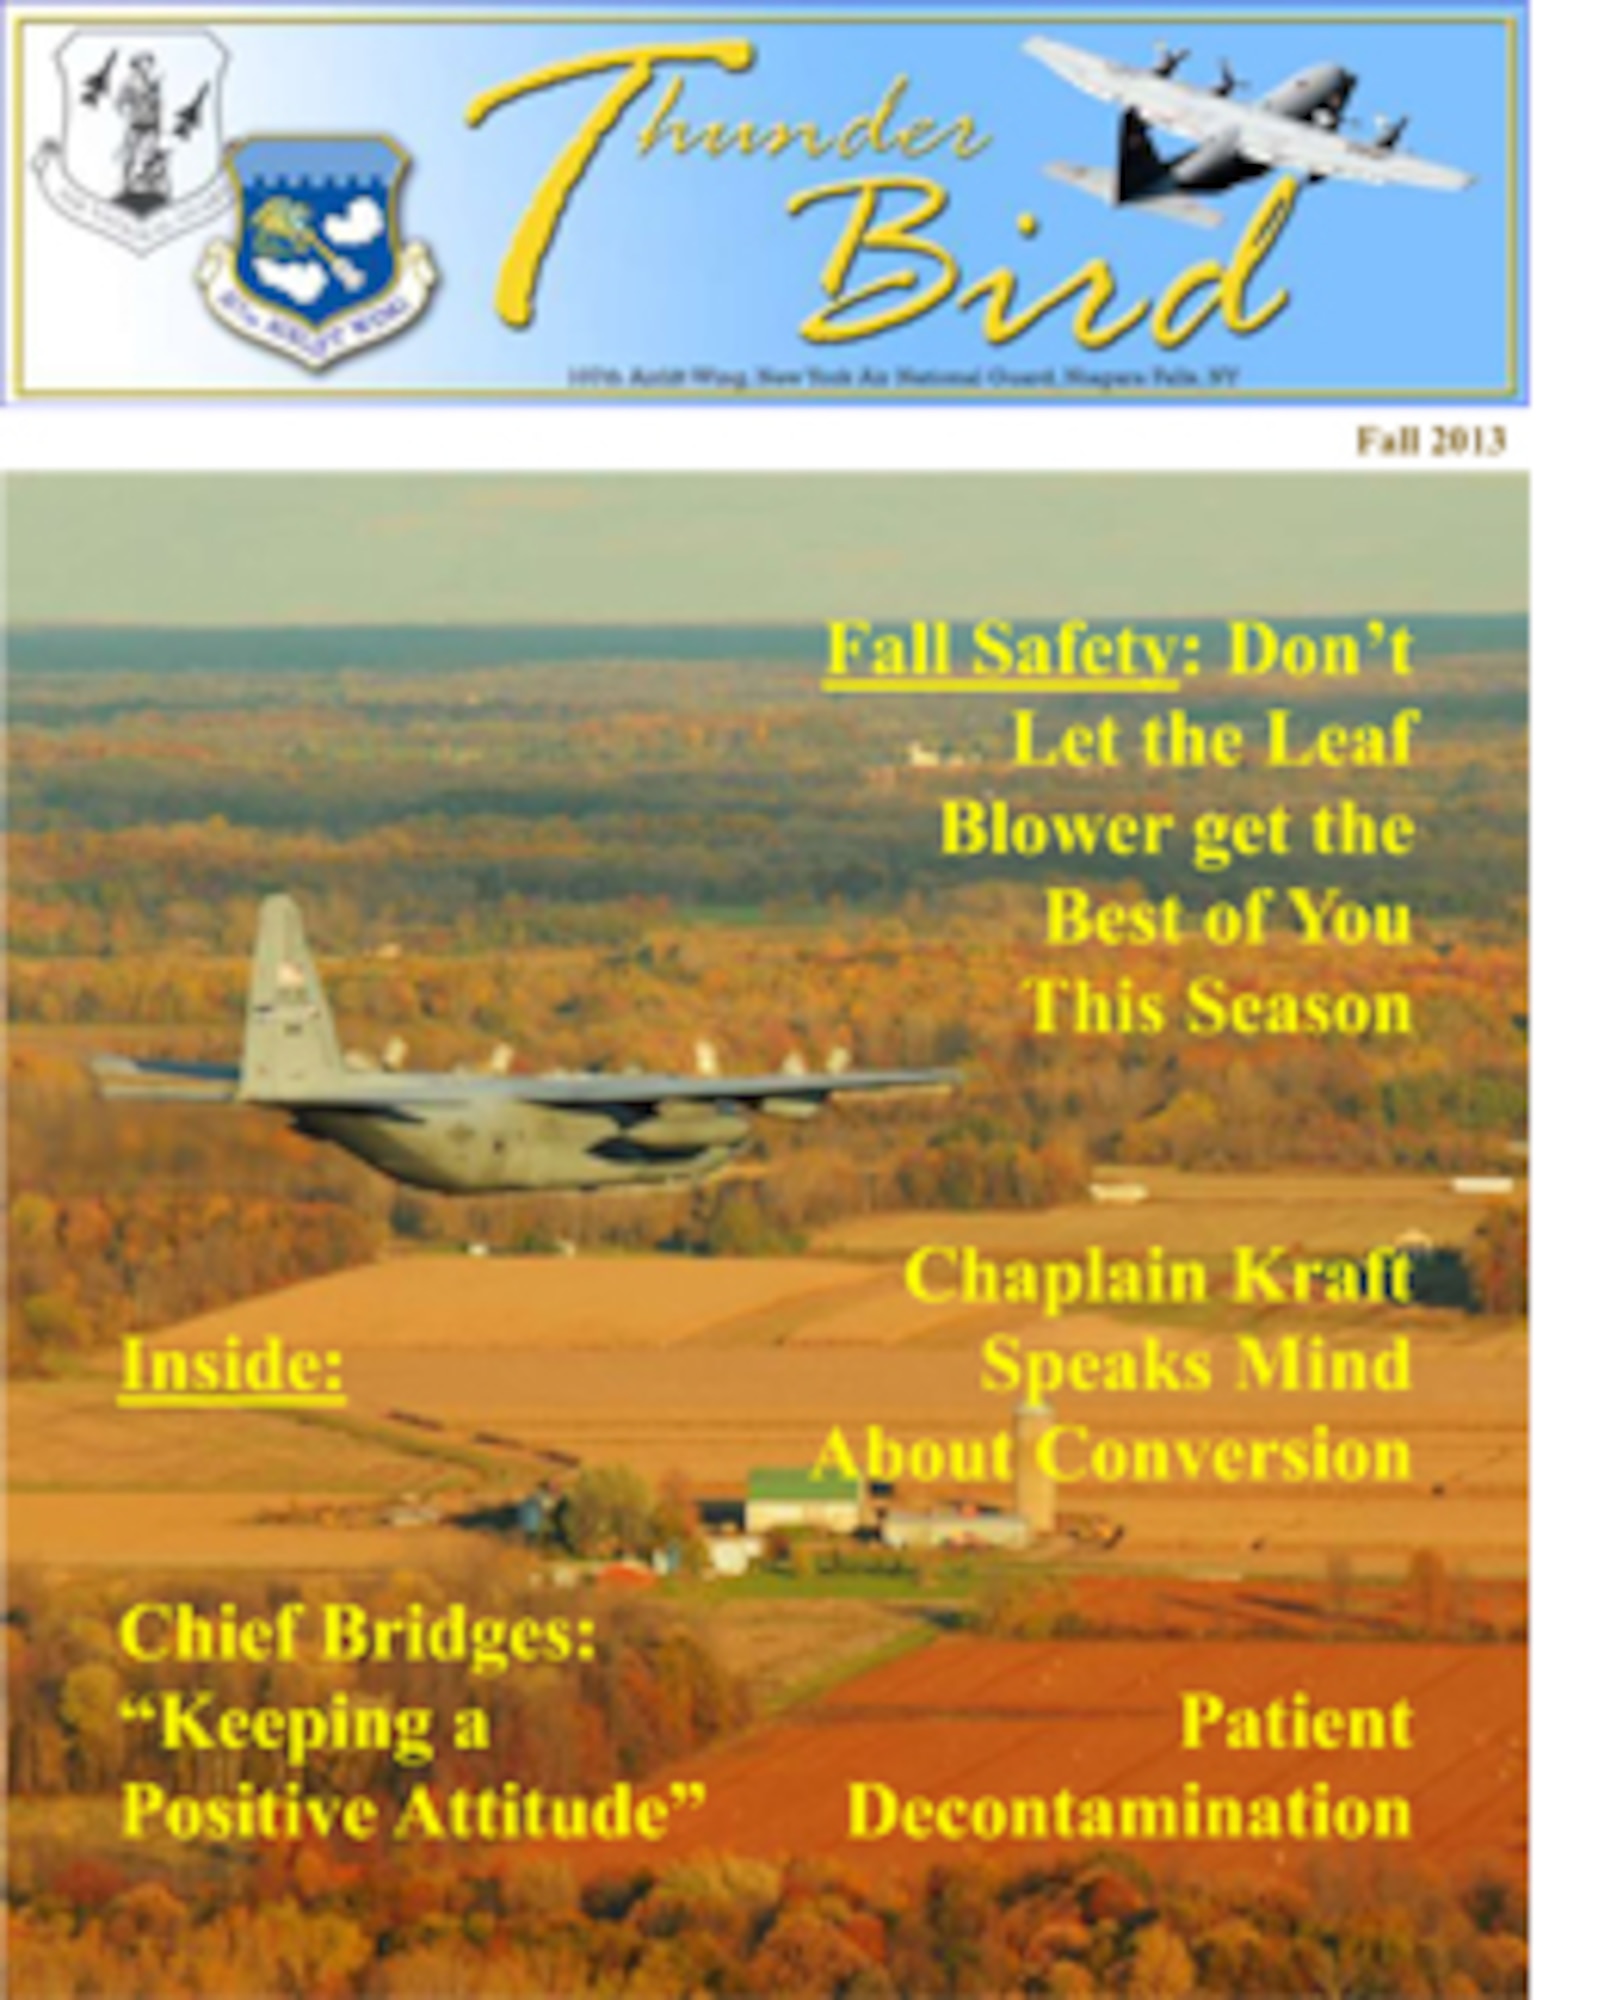 The ThunderBird is a quarterly edition. It will be published in March, June, September, and December (spring, summer, fall and winter issues). (Air Force Graphic/Tech. Sgt. Brandy Fowler)